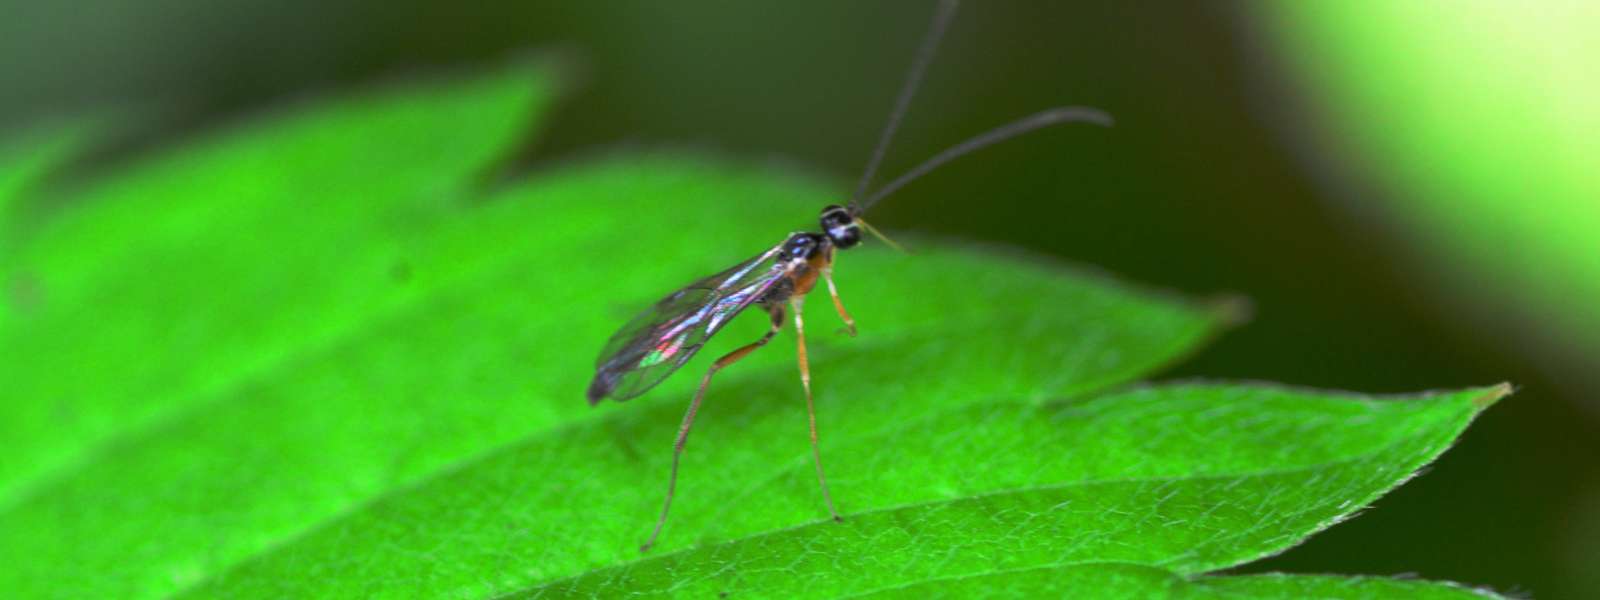 Fungus gnats - How to identify and get rid of (2022)